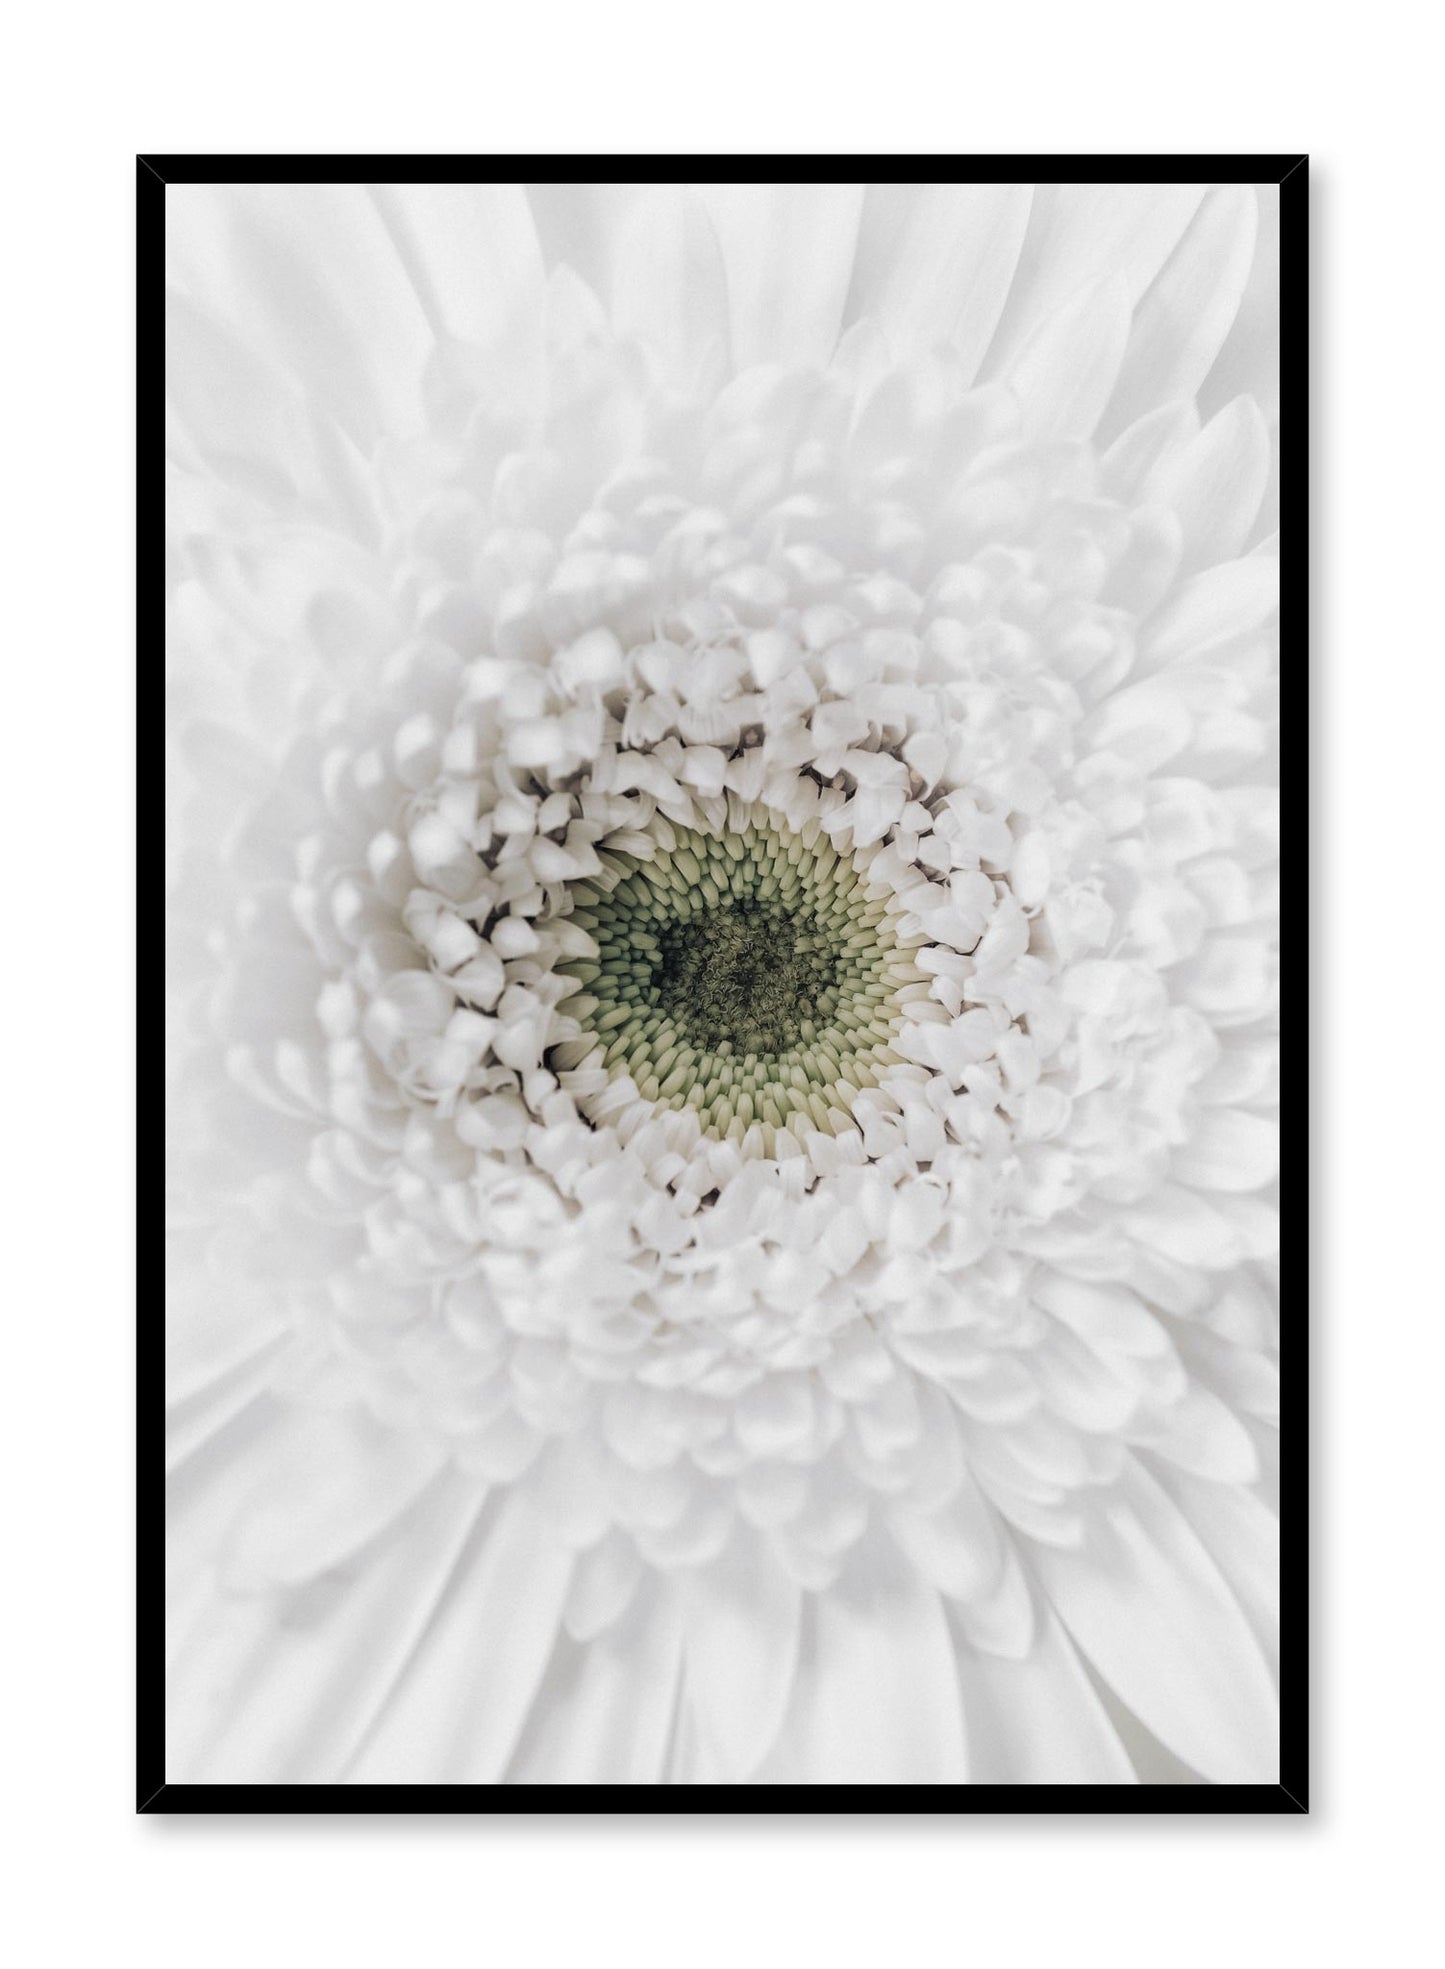 Minimalist wall poster by Opposite Wall with white gerbera daisy floral photography